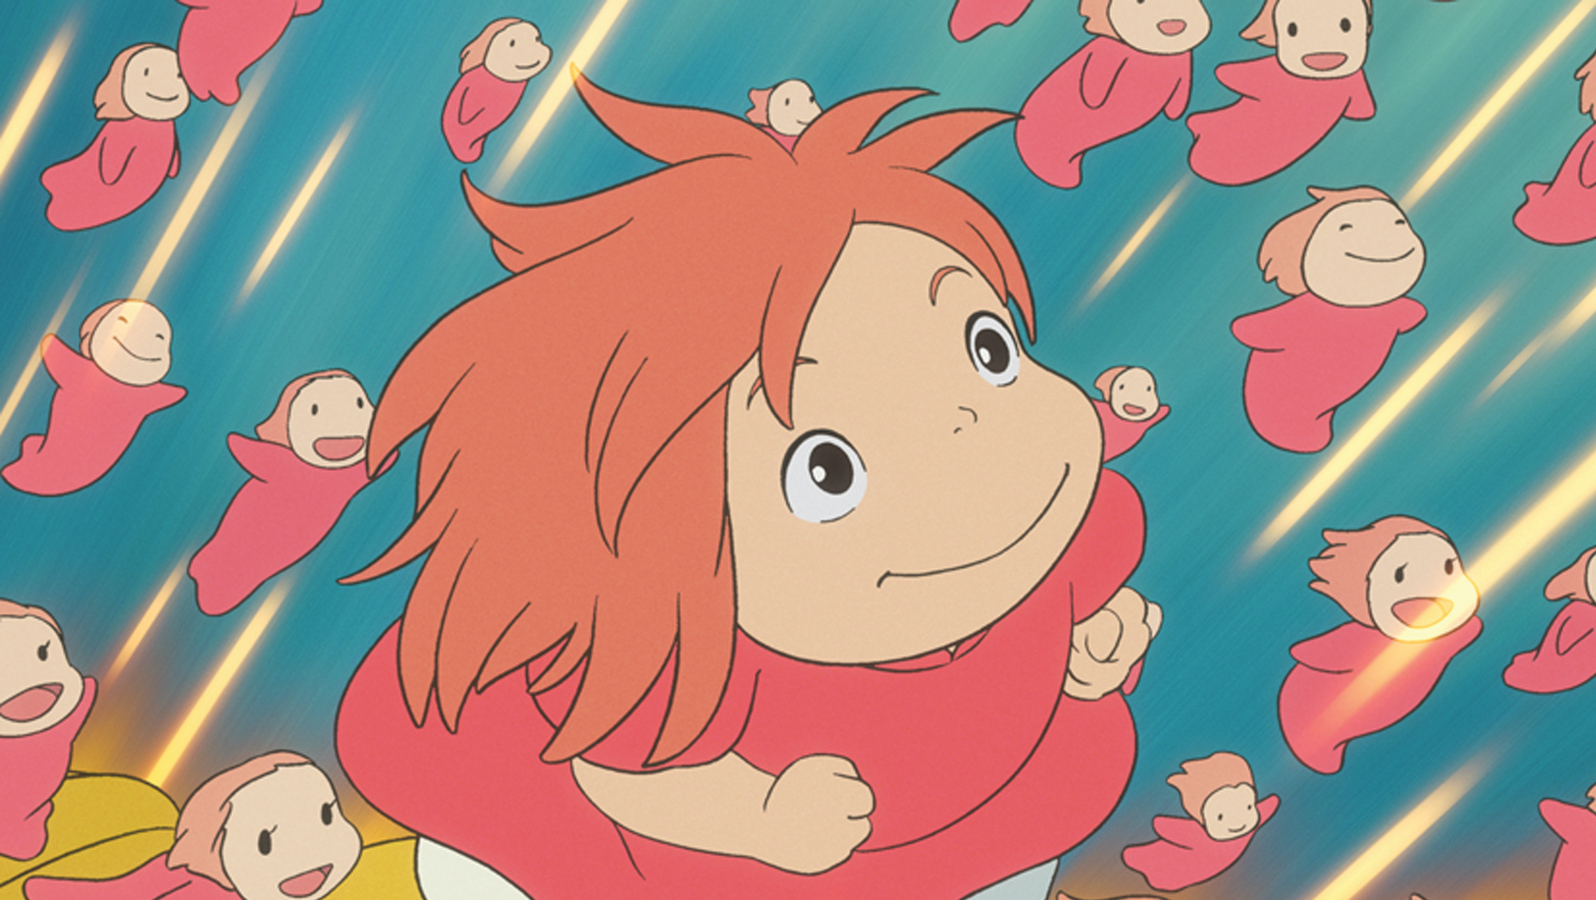 Ponyo Museum of the Moving Image